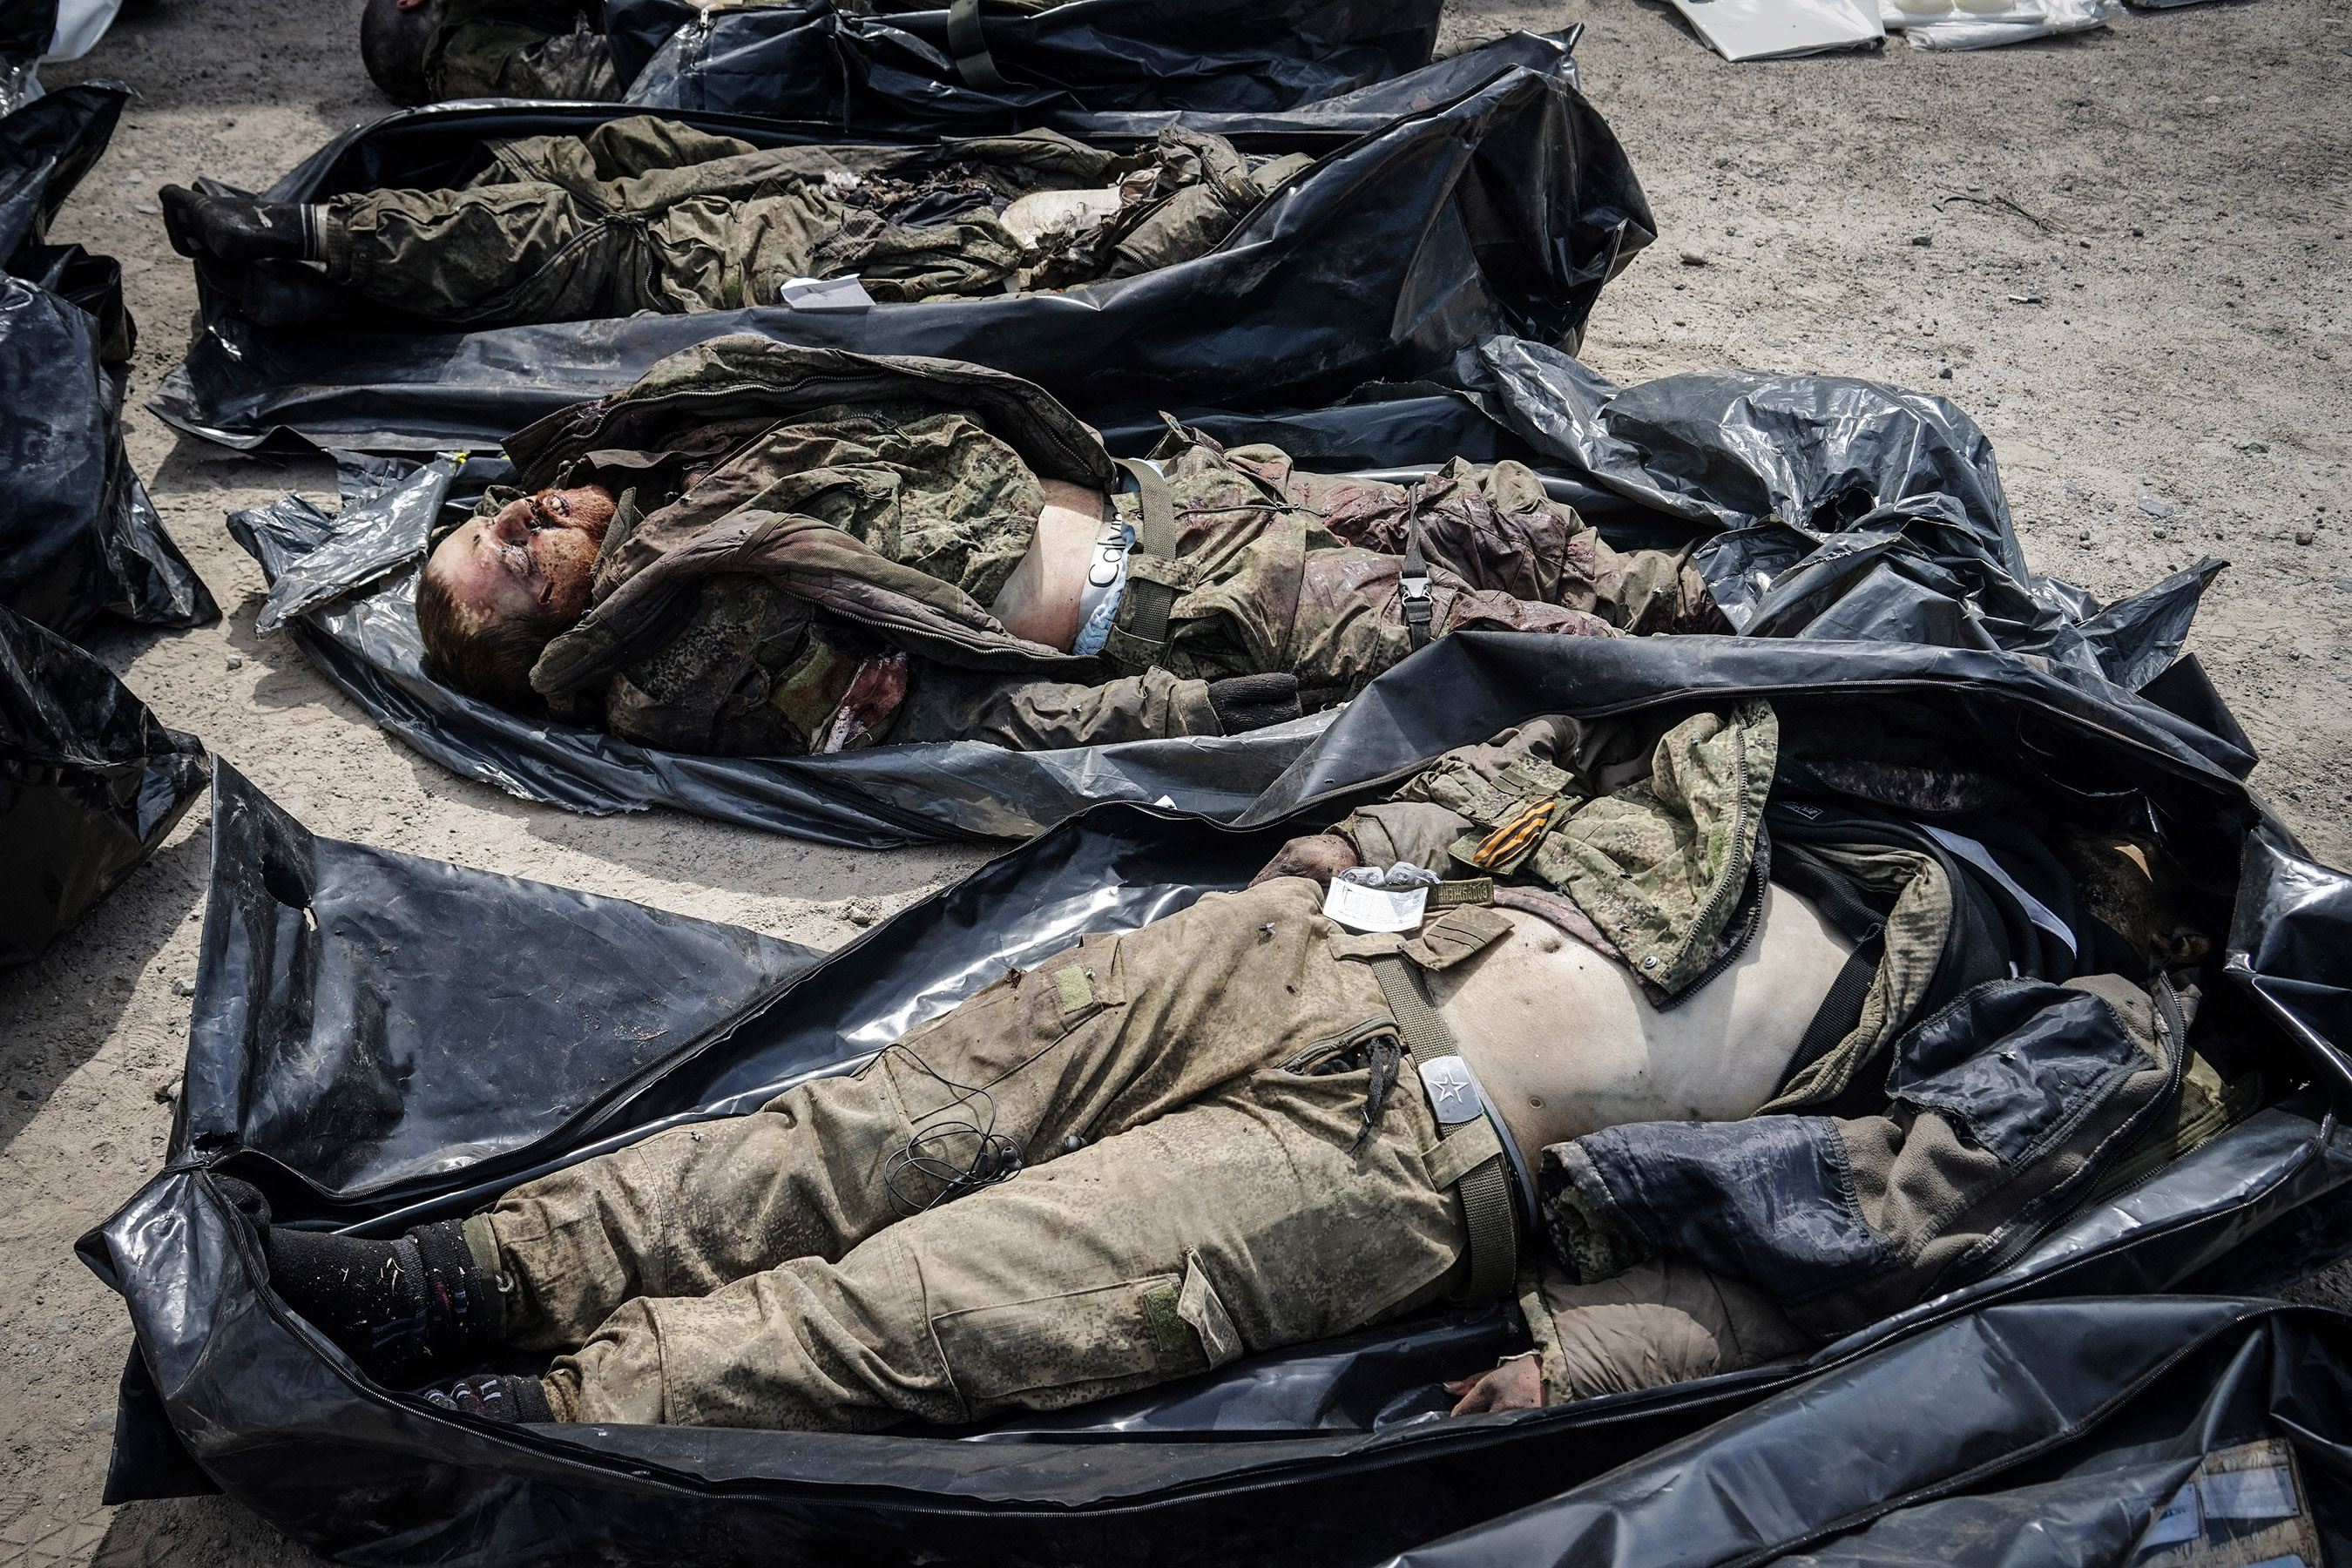 Ukrainian forensic experts describe the bodies of dead Russian soldiers